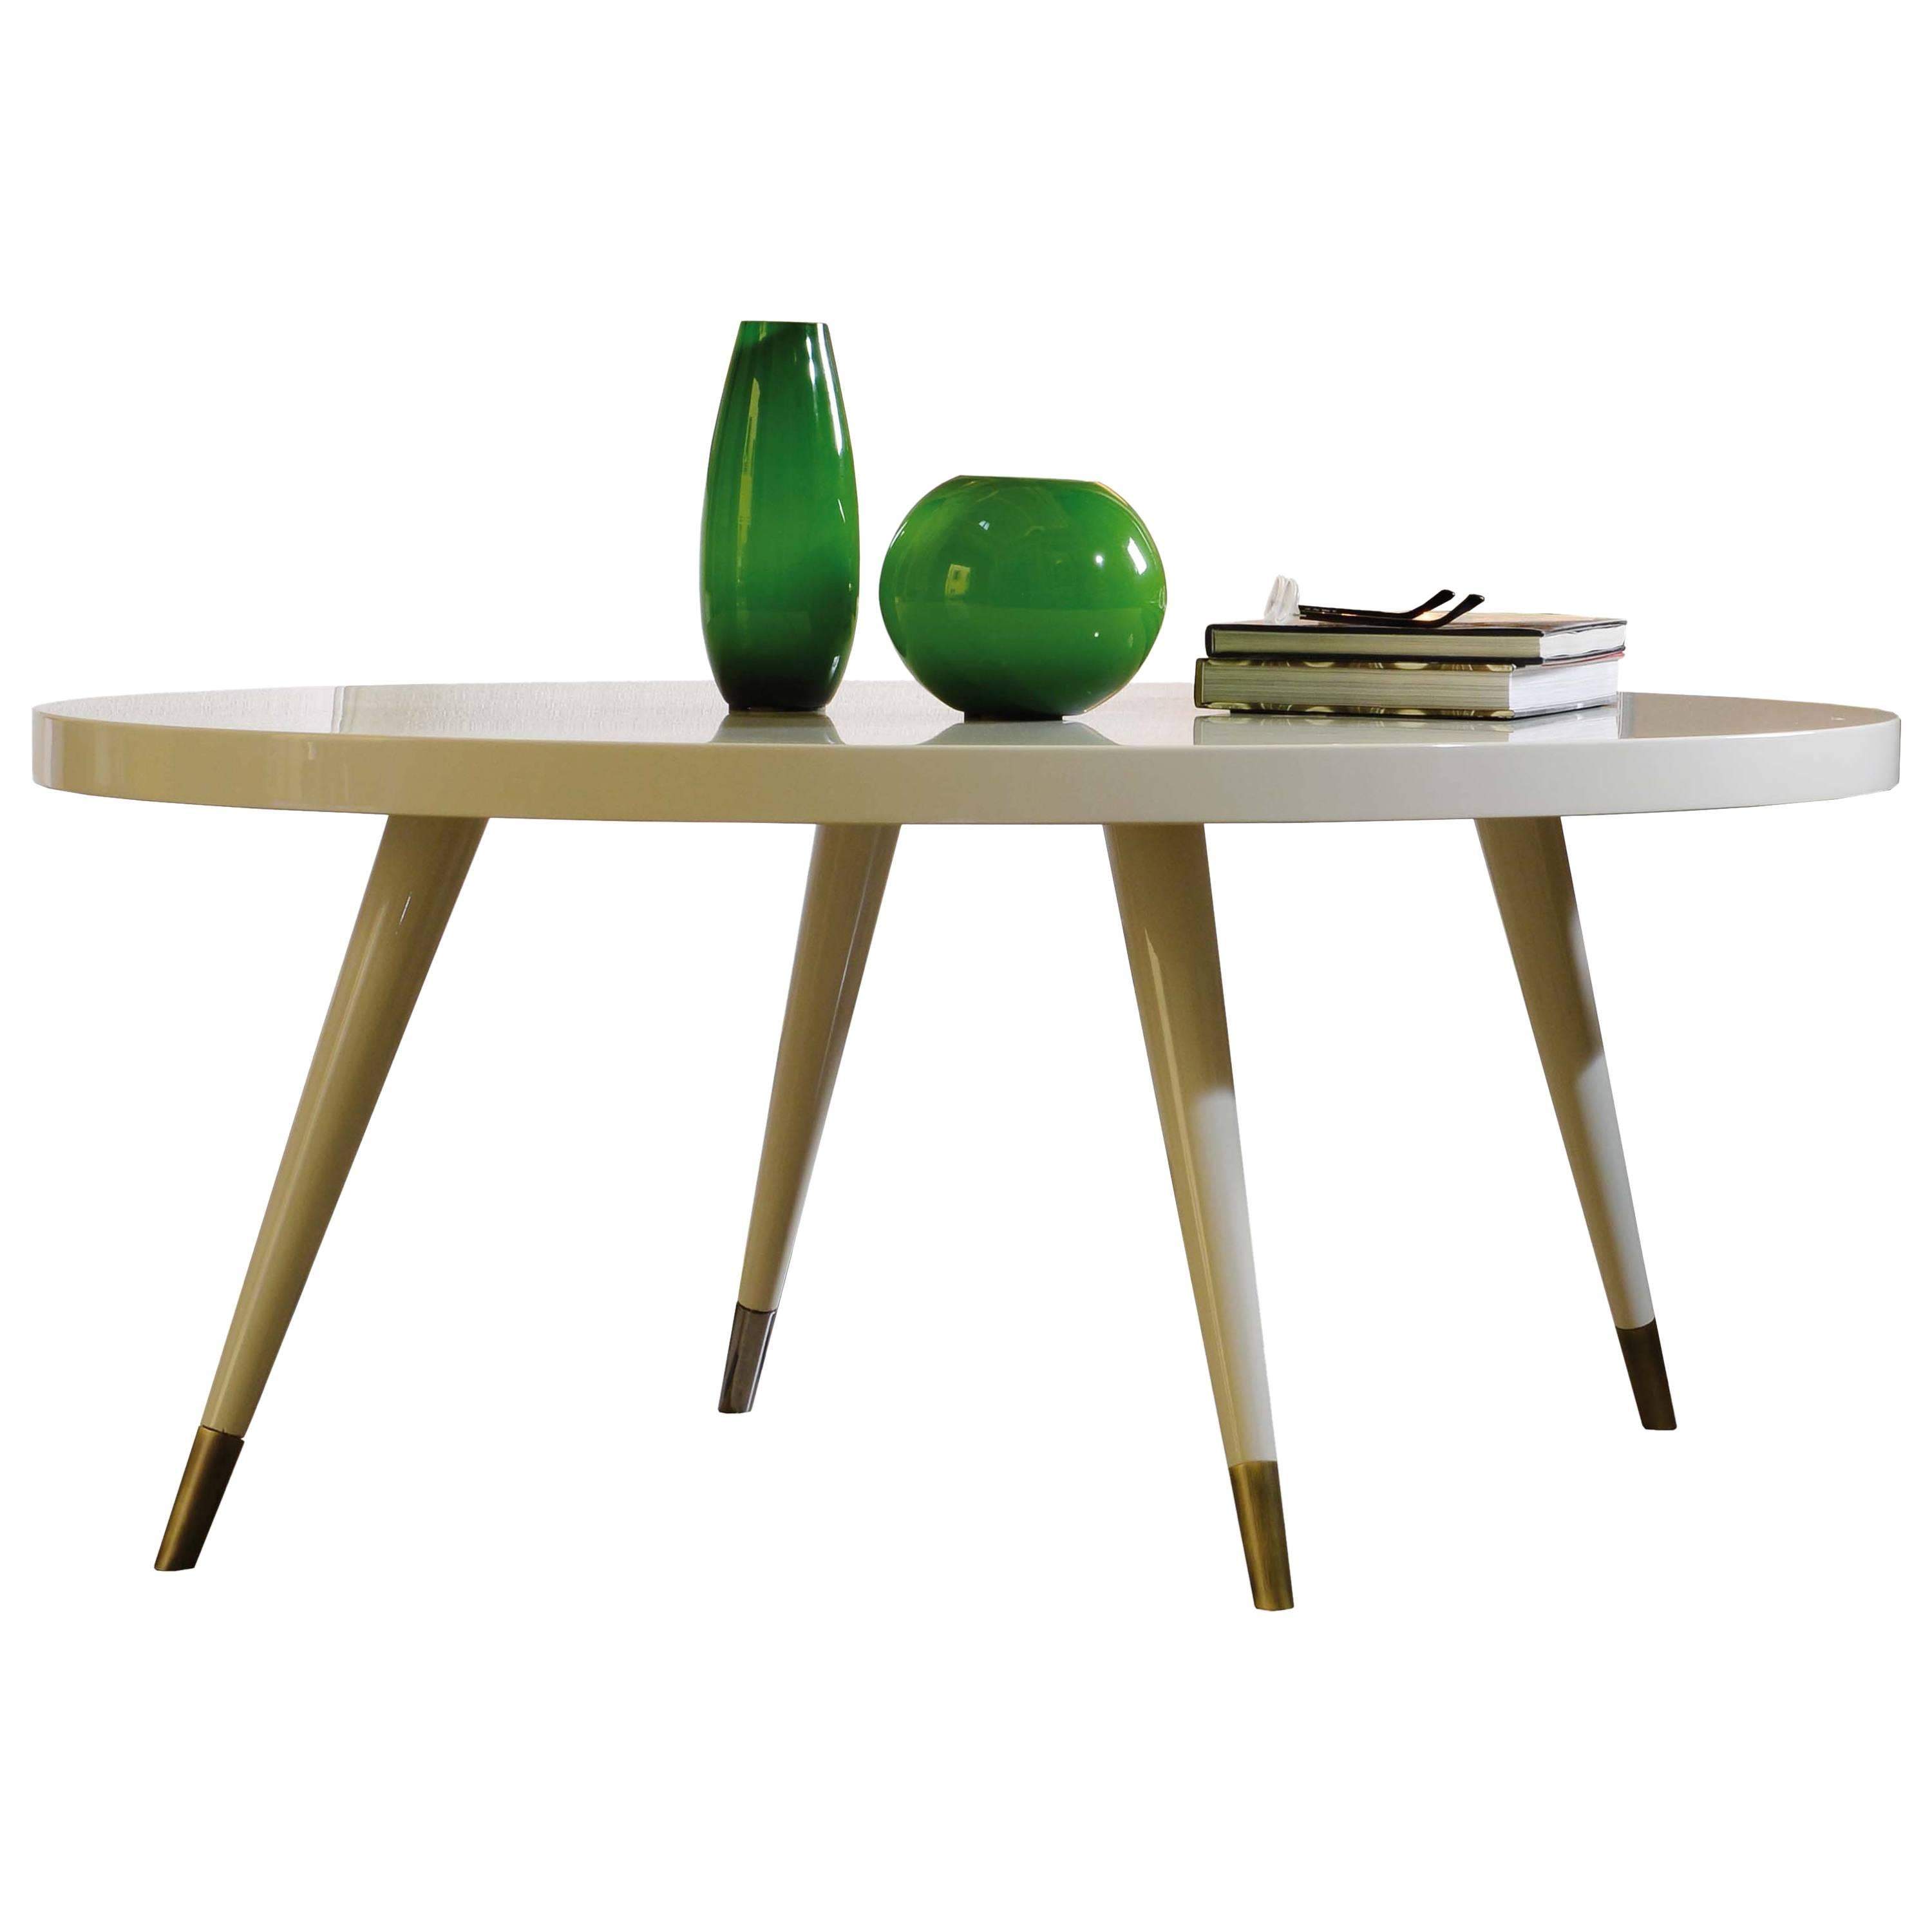 Round, elliptic, square or rectangular small table, mat or gloss lacquered, with gloss brass plated, gloss chromed or bronzed metal tips.

Diam.100cm H45cm-round, square, rectangular or elliptical $2450.
Diam.110cm H45cm-round, square,